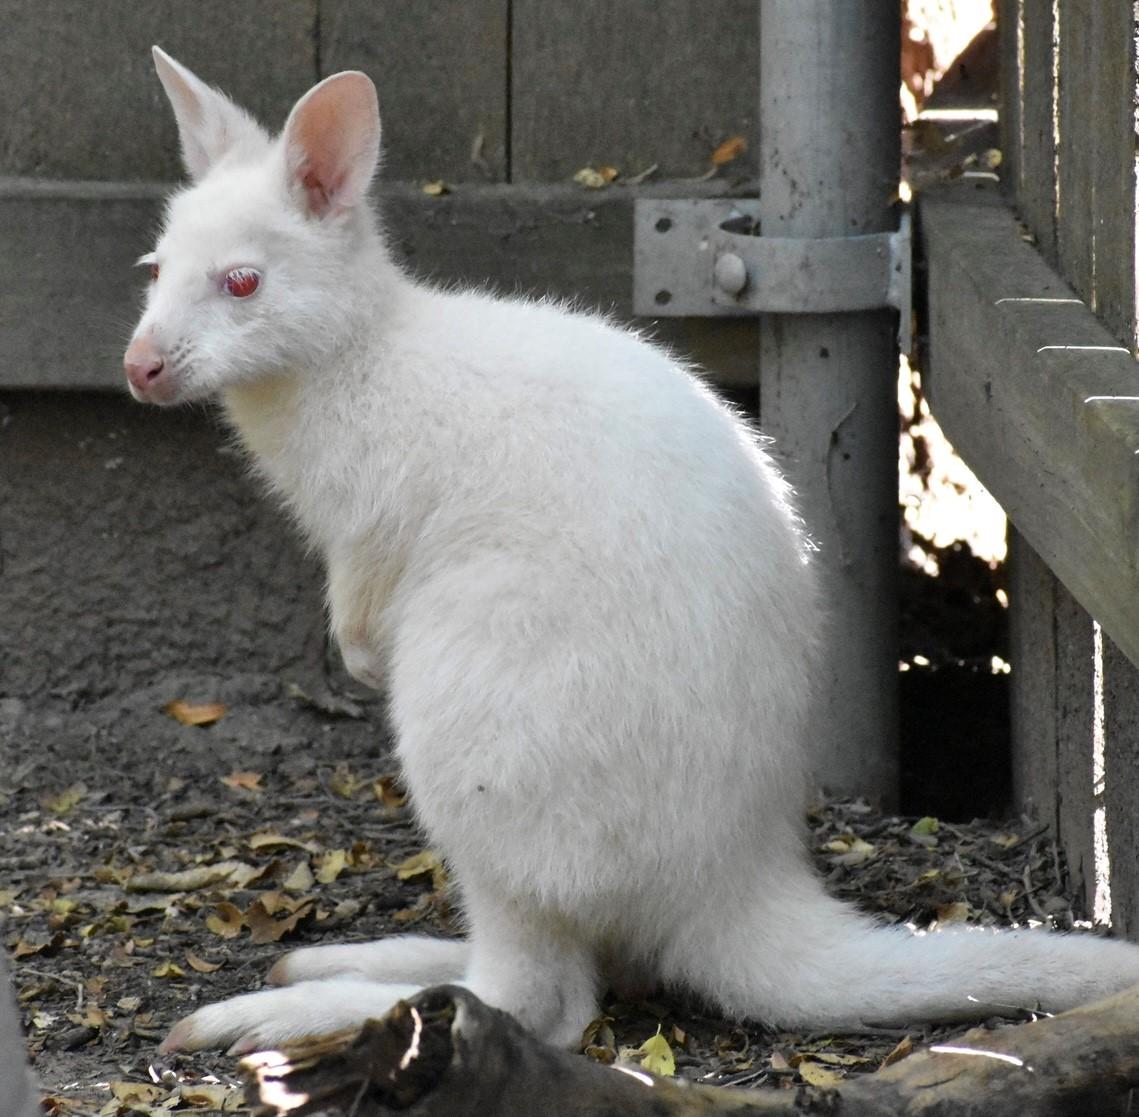 Bruny the albino wallaby joey at Sunset Zoo in Manhattan, New York. (Courtesy of Amelia Jerome/<a href="https://mailchi.mp/cityofmhk/sunset-zoo-has-rare-albino-born-at-zoo">Sunset Zoo</a>)